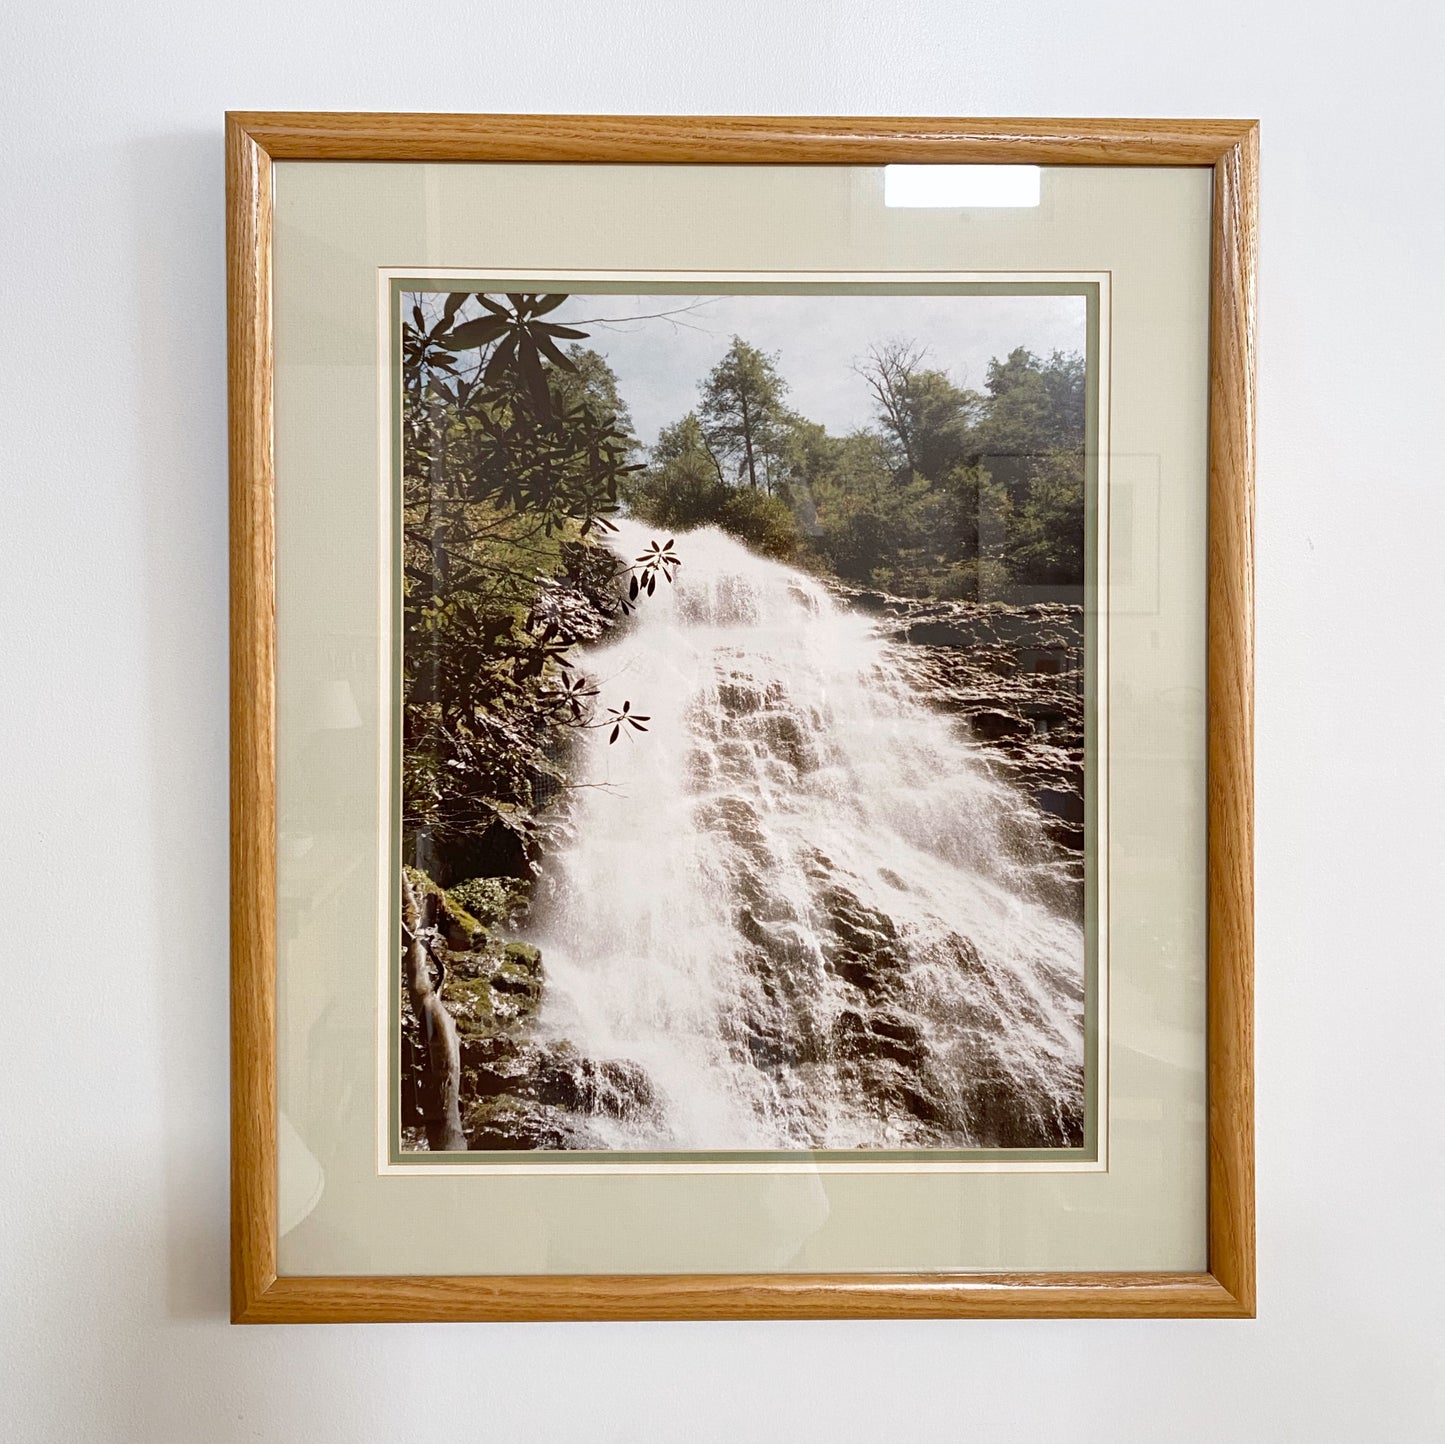 Large-scale Vintage Waterfall Photograph (23x27)